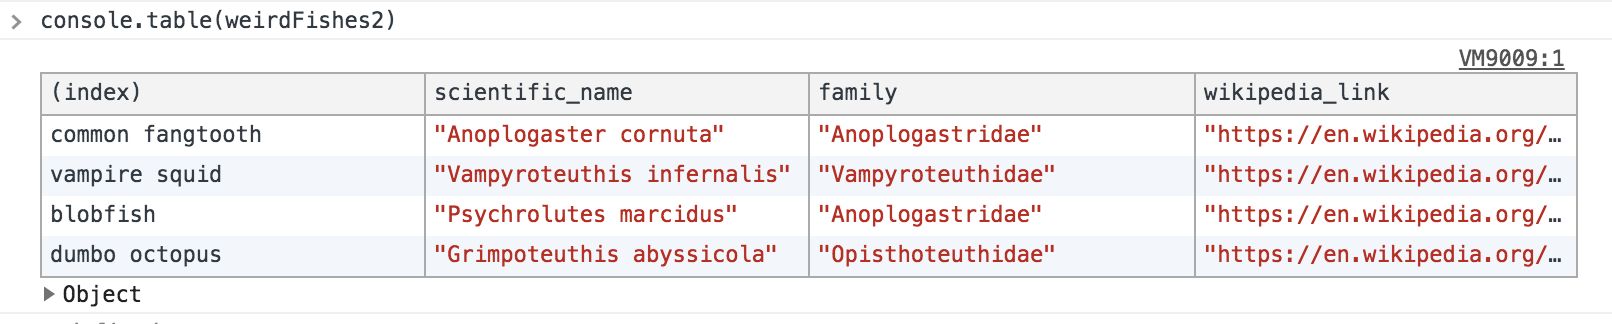 Output of running console.table on an object of objects in Chrome